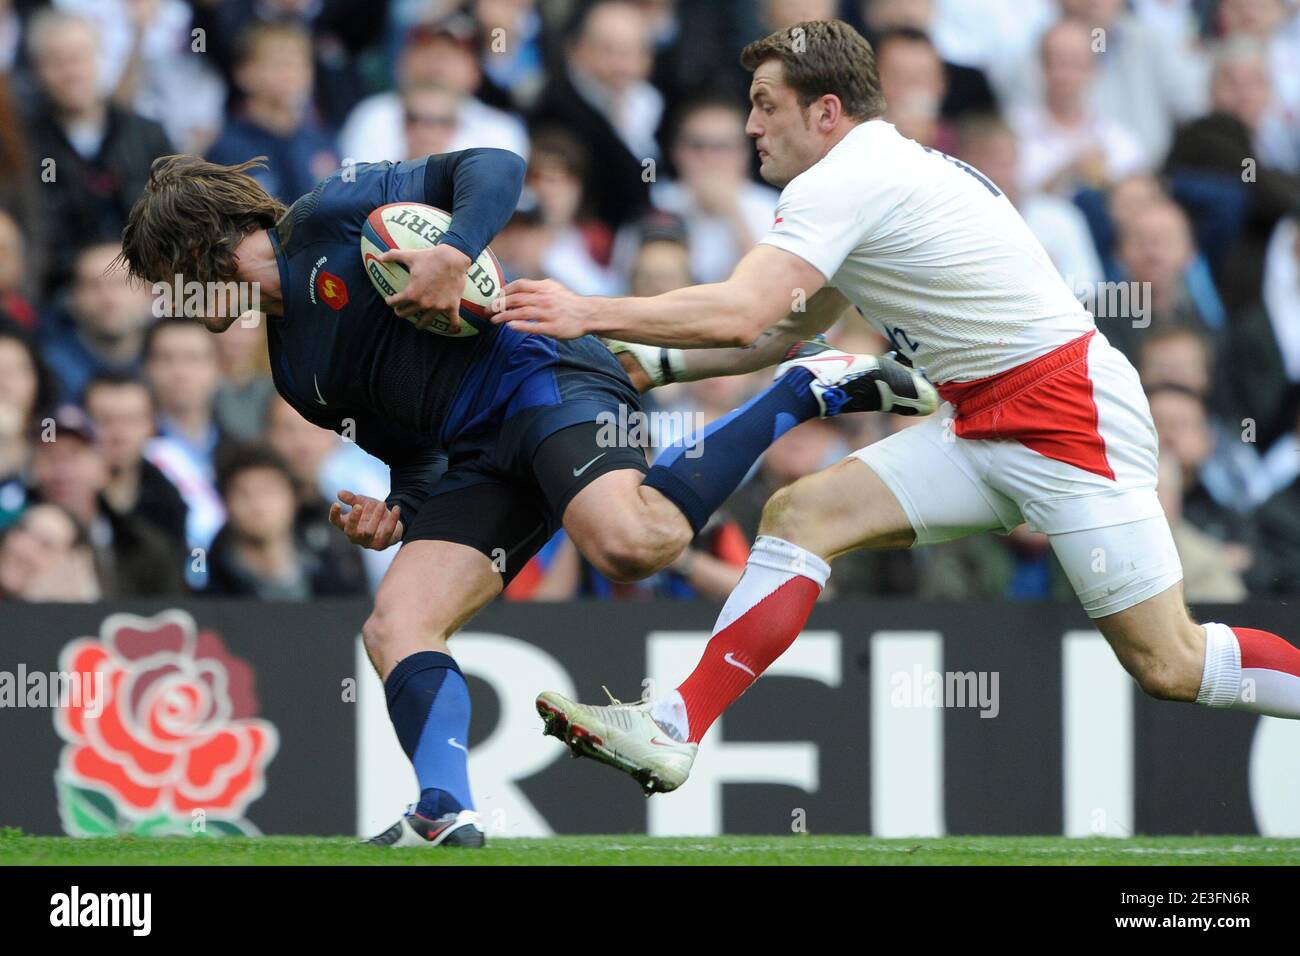 Maxime Medard is tackled by Mark Cueto during the RBS 6 Nations Championship 2009 Rugby match, England vs France at the Twickenham stadium in London, UK on March 15, 2009. England won 34-10. Photo by Henri Szwarc/ABACAPRESS.COM Stock Photo